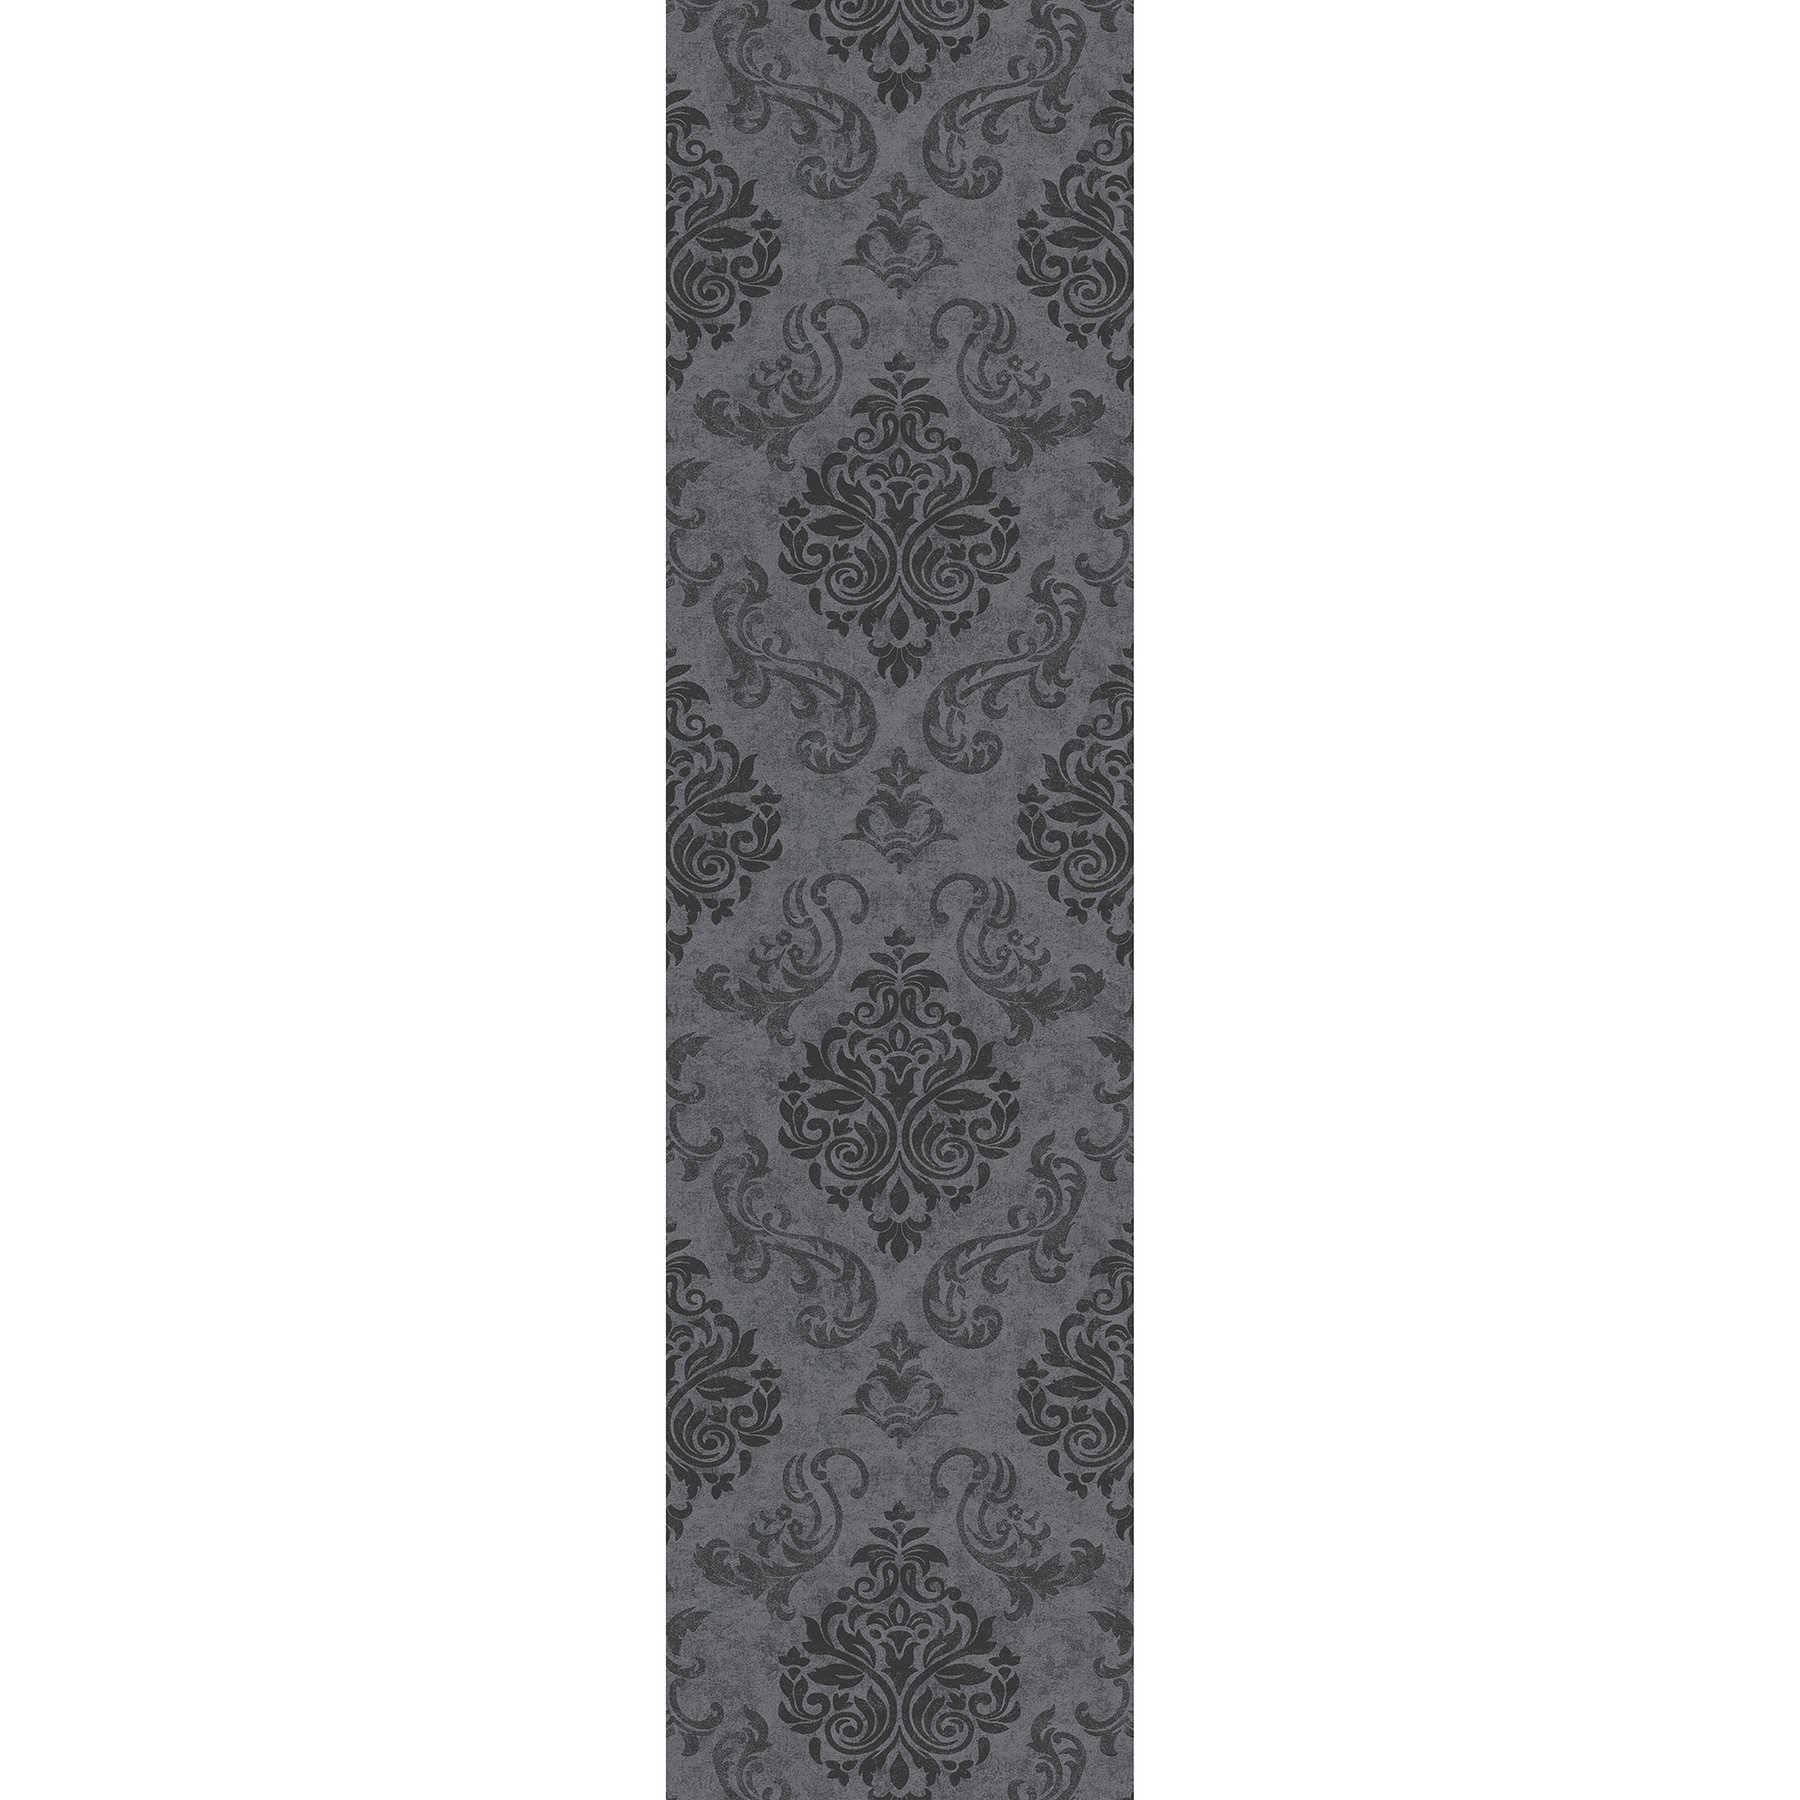 Baroque ornament wallpaper with textured pattern in used look - black
